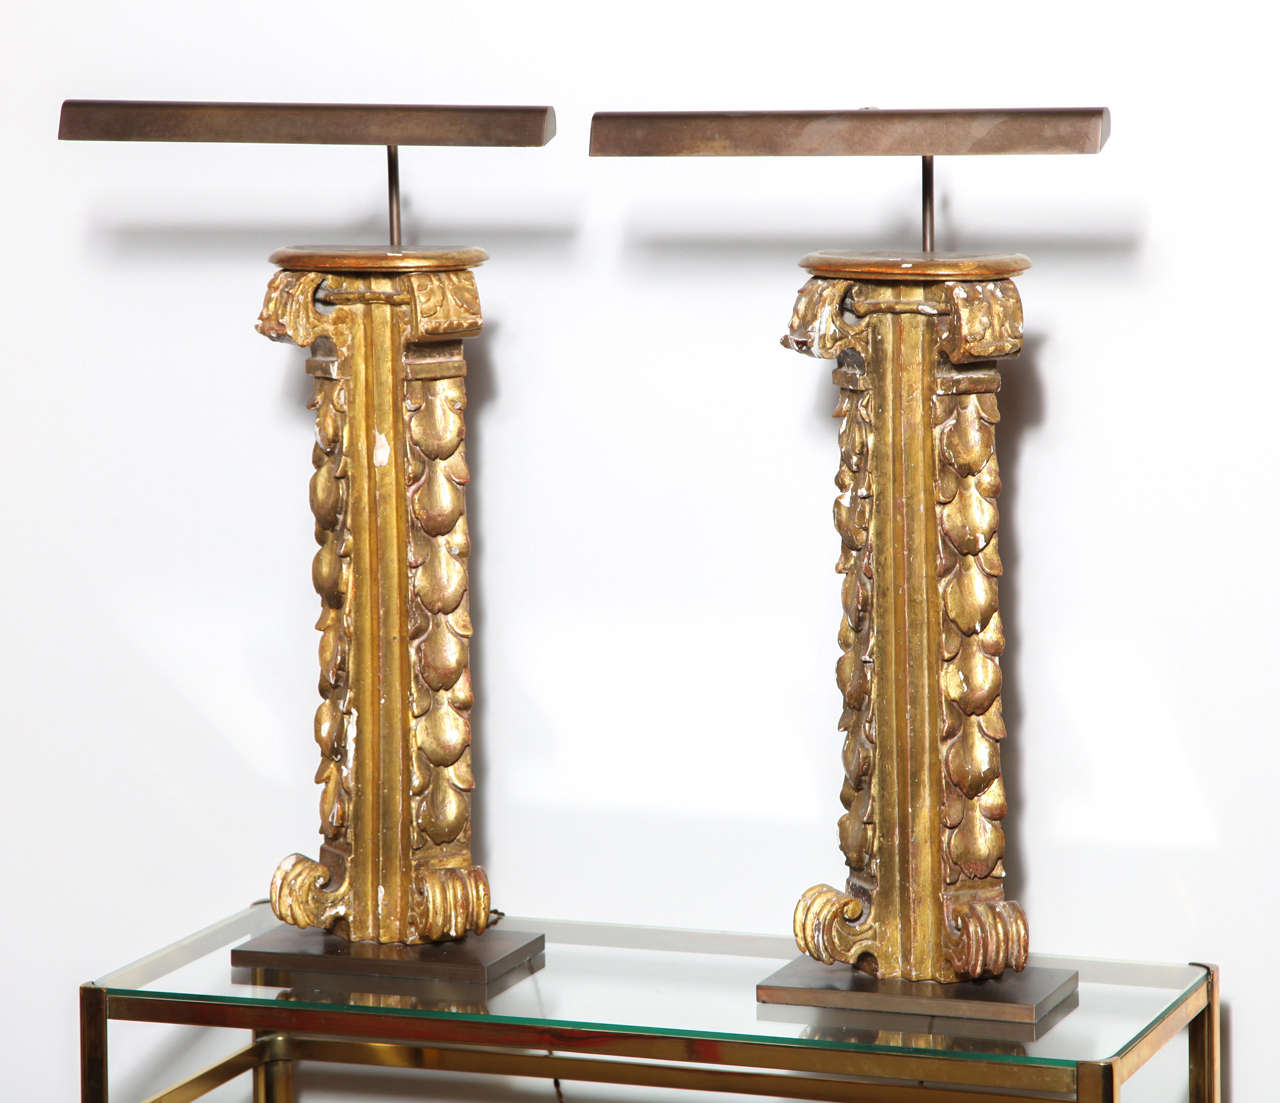 Pair of table lamps made with gilt 18th century architectural elements. The shade and base are made in antique bronze.